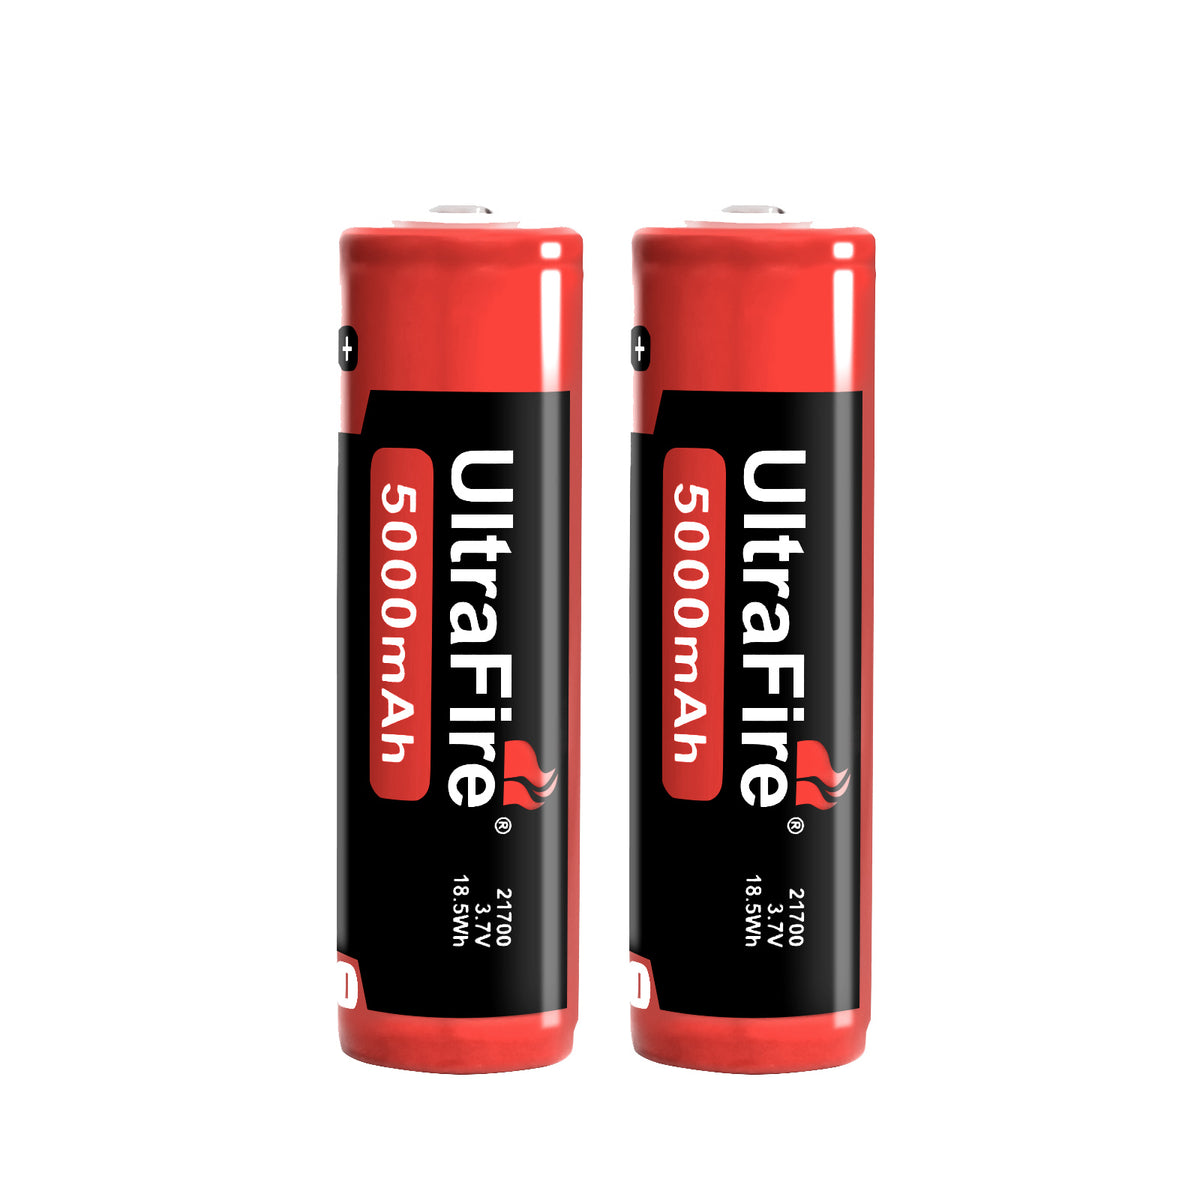 UltraFire 5000mAh 3.7V 21700 Rechargeable Lithium Battery With Protection Board (2PCS)